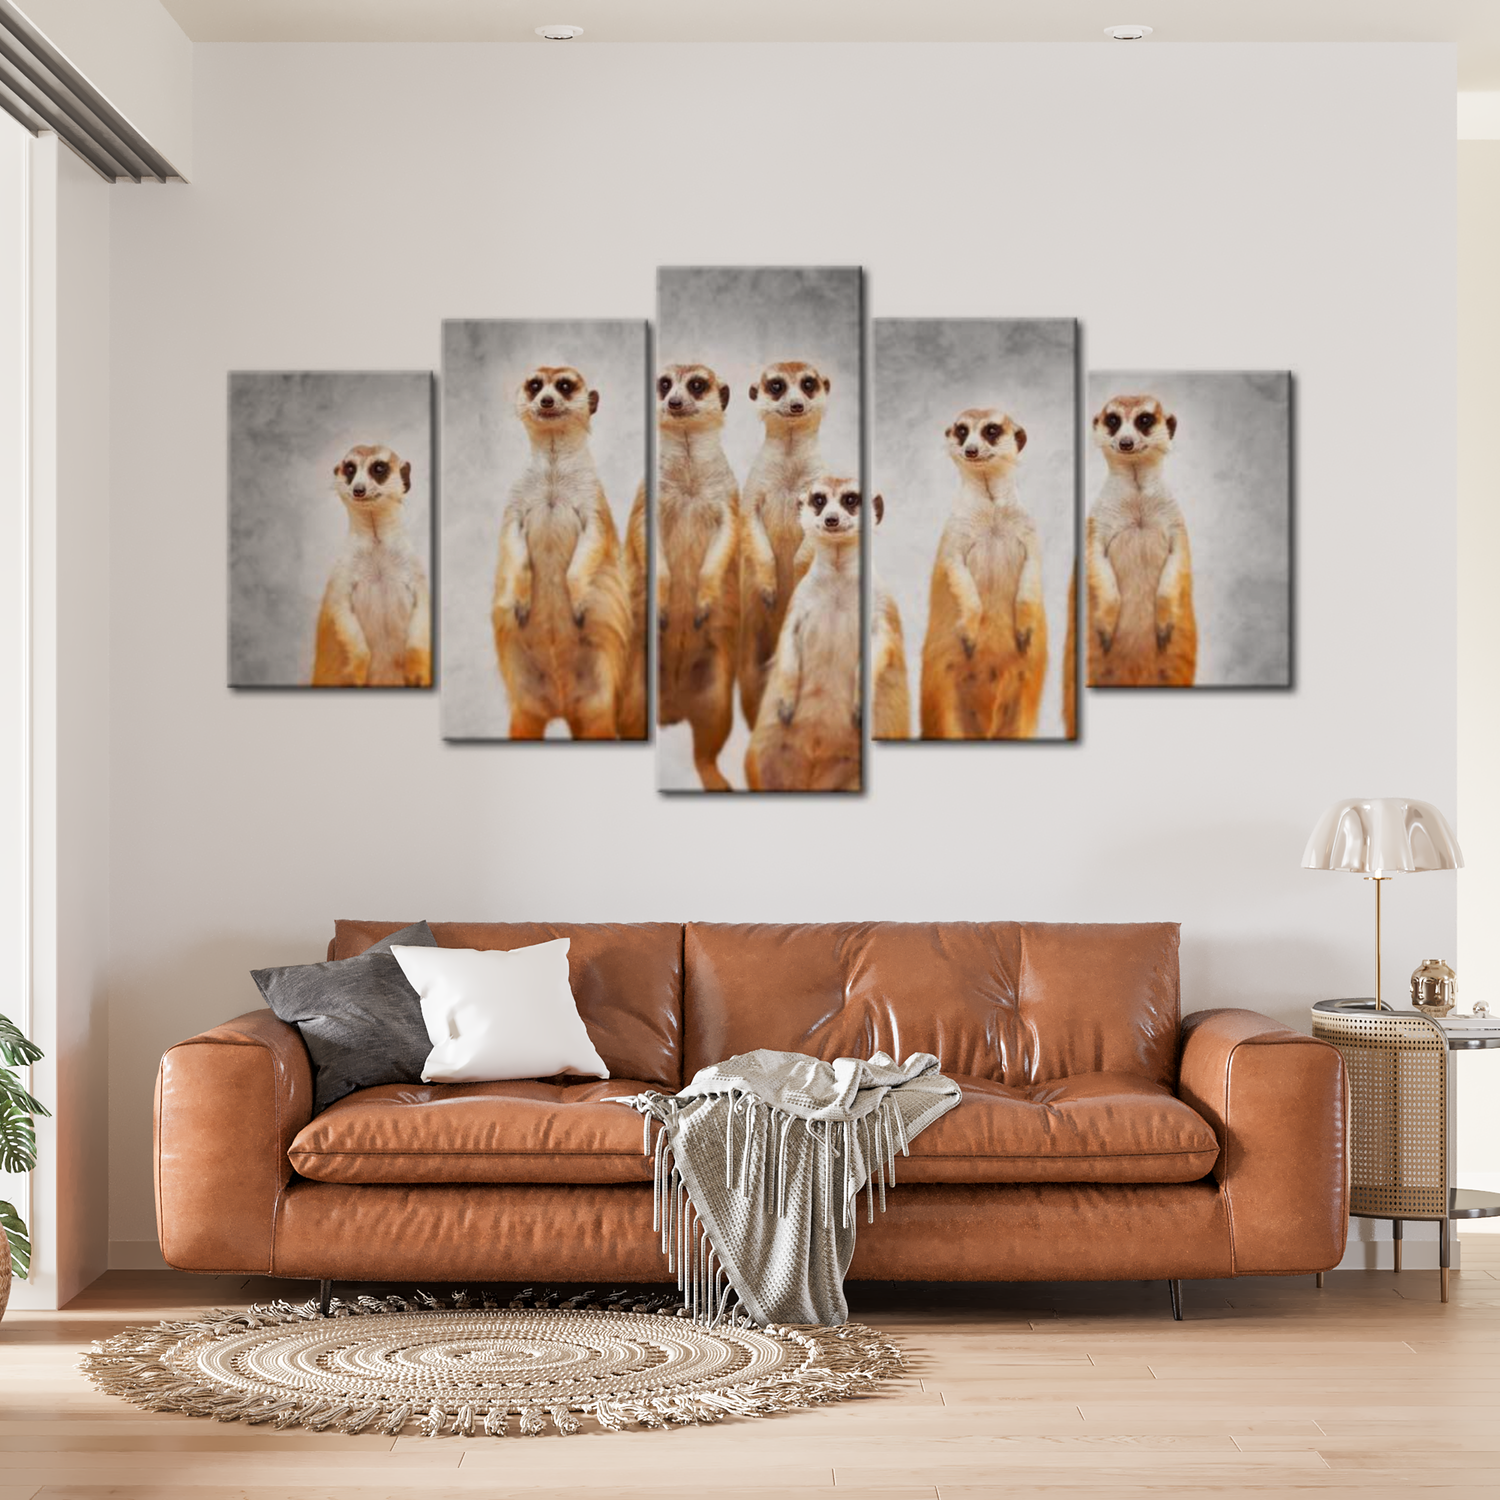 Stretched Canvas Animal Art - Meerkats 40"Wx20"H